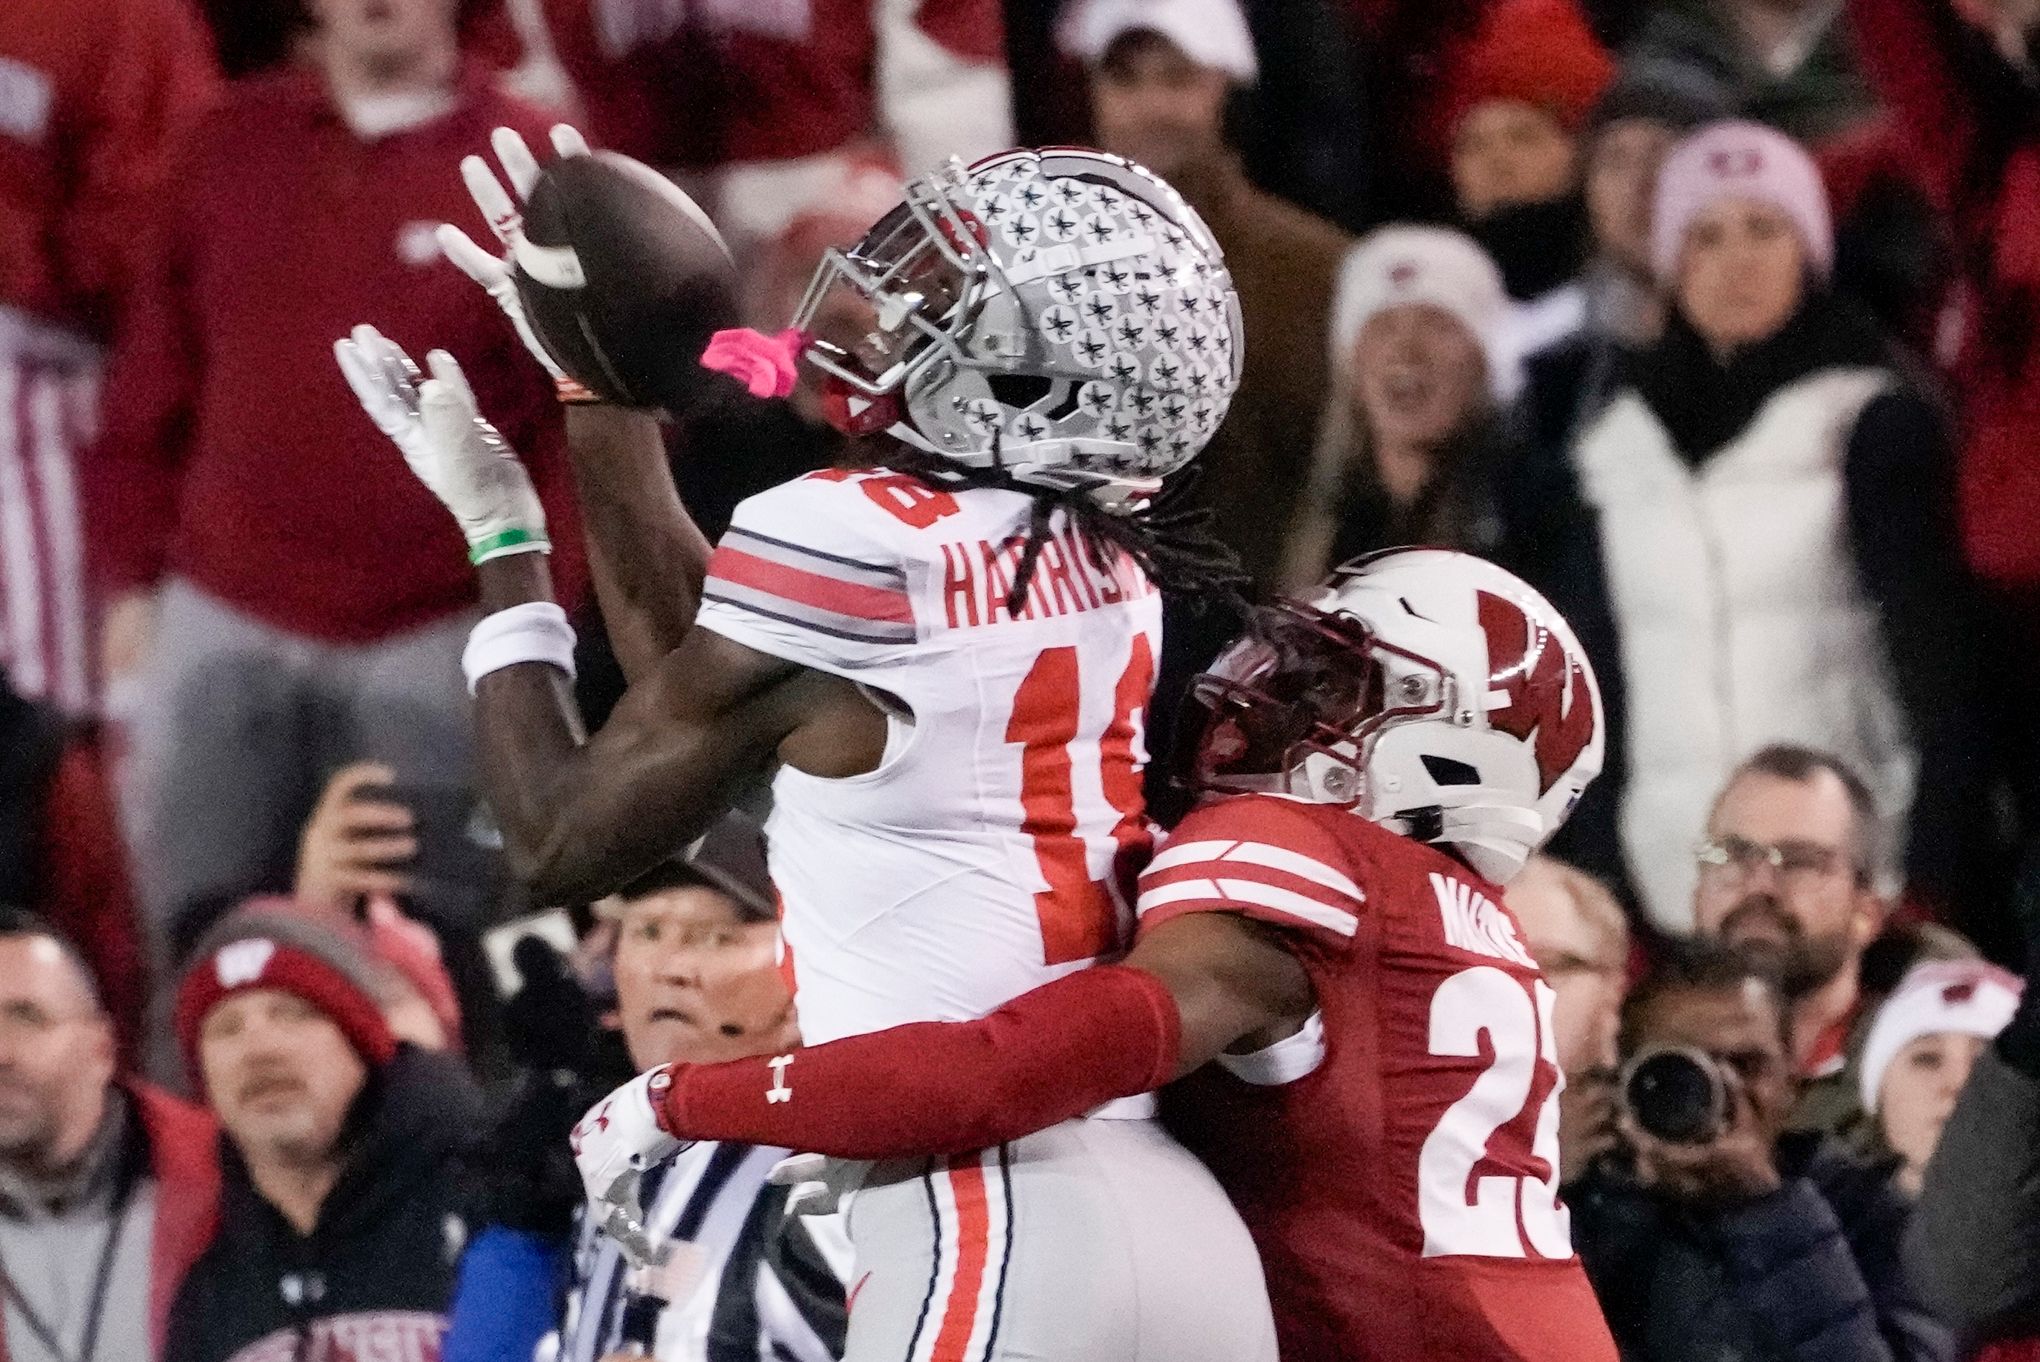 Harrison Jr. the difference as No. 3 Ohio State beats No. 7 Penn